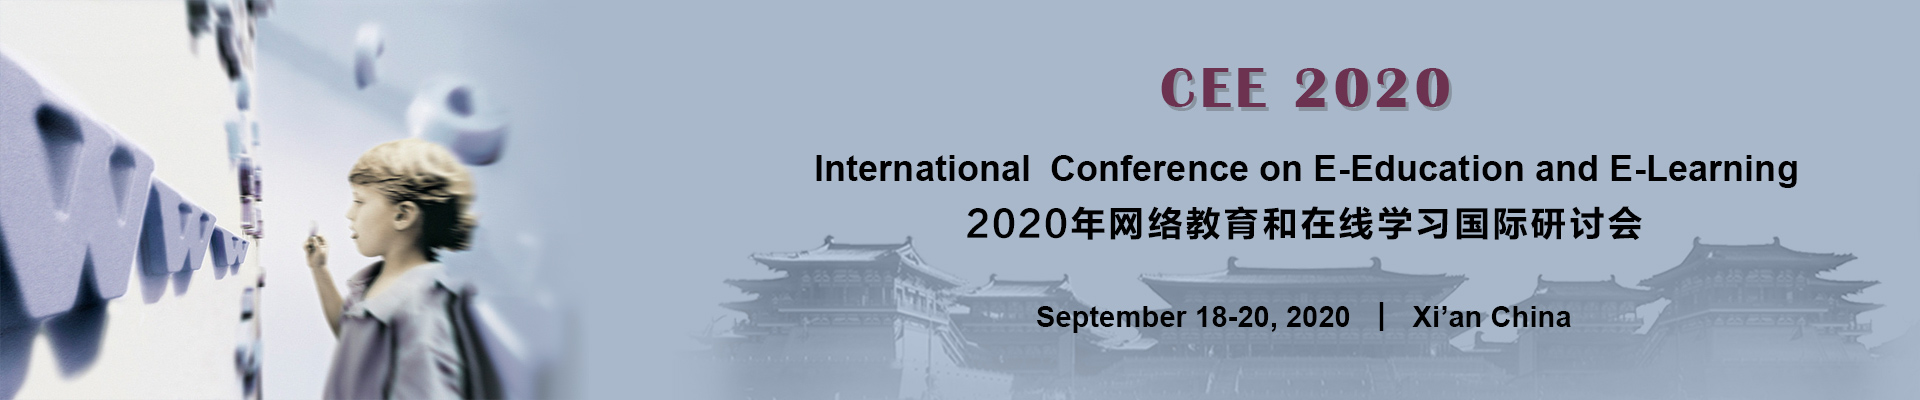 International Conference on E-Education and E-Learning (CEE 2020), Xi'an, Shaanxi, China